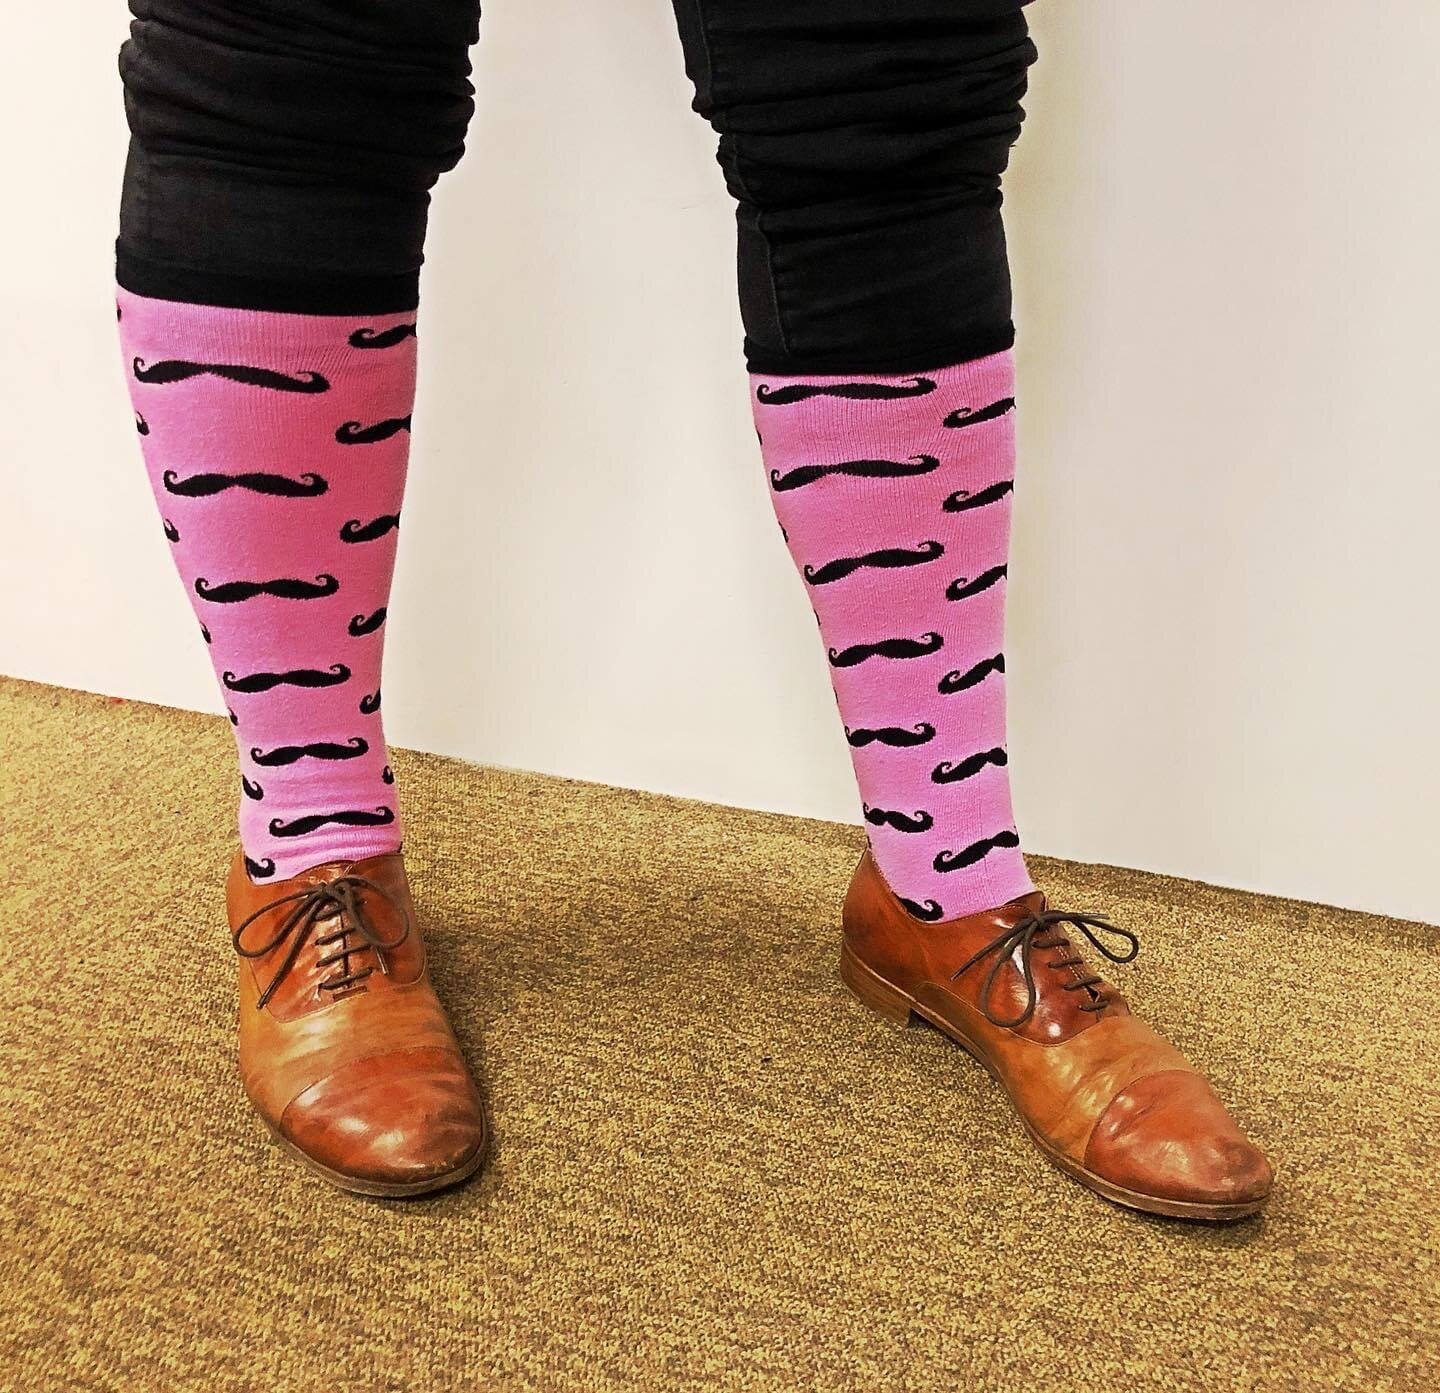 Lissanthea Taylor’s object: This set of crazy pink socks.